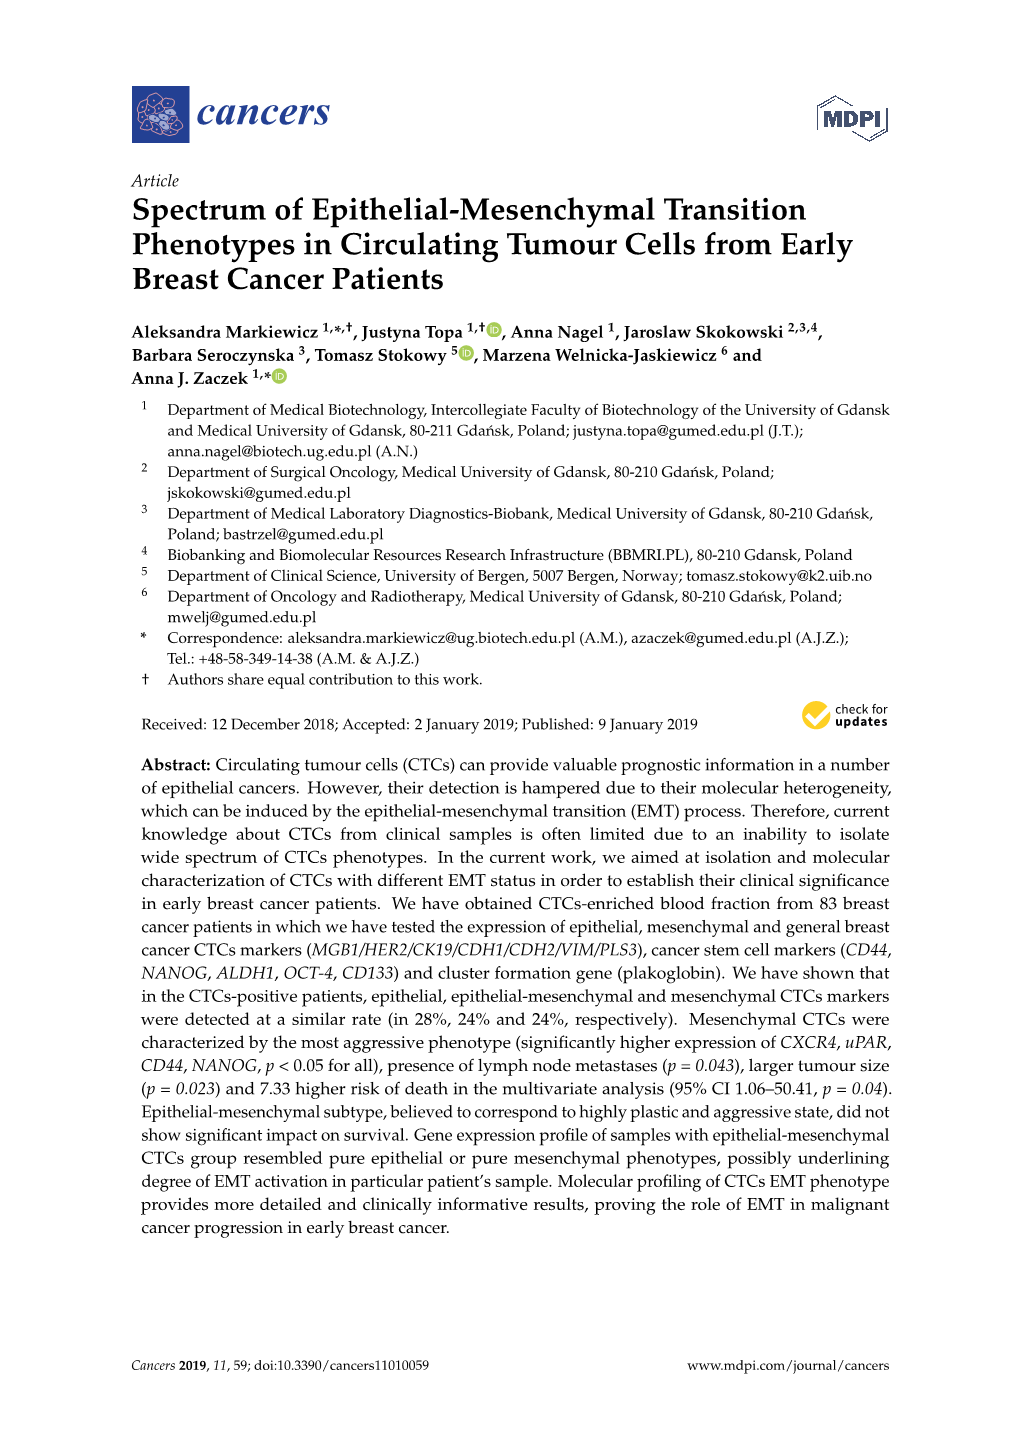 Spectrum of Epithelial-Mesenchymal Transition Phenotypes in Circulating Tumour Cells from Early Breast Cancer Patients